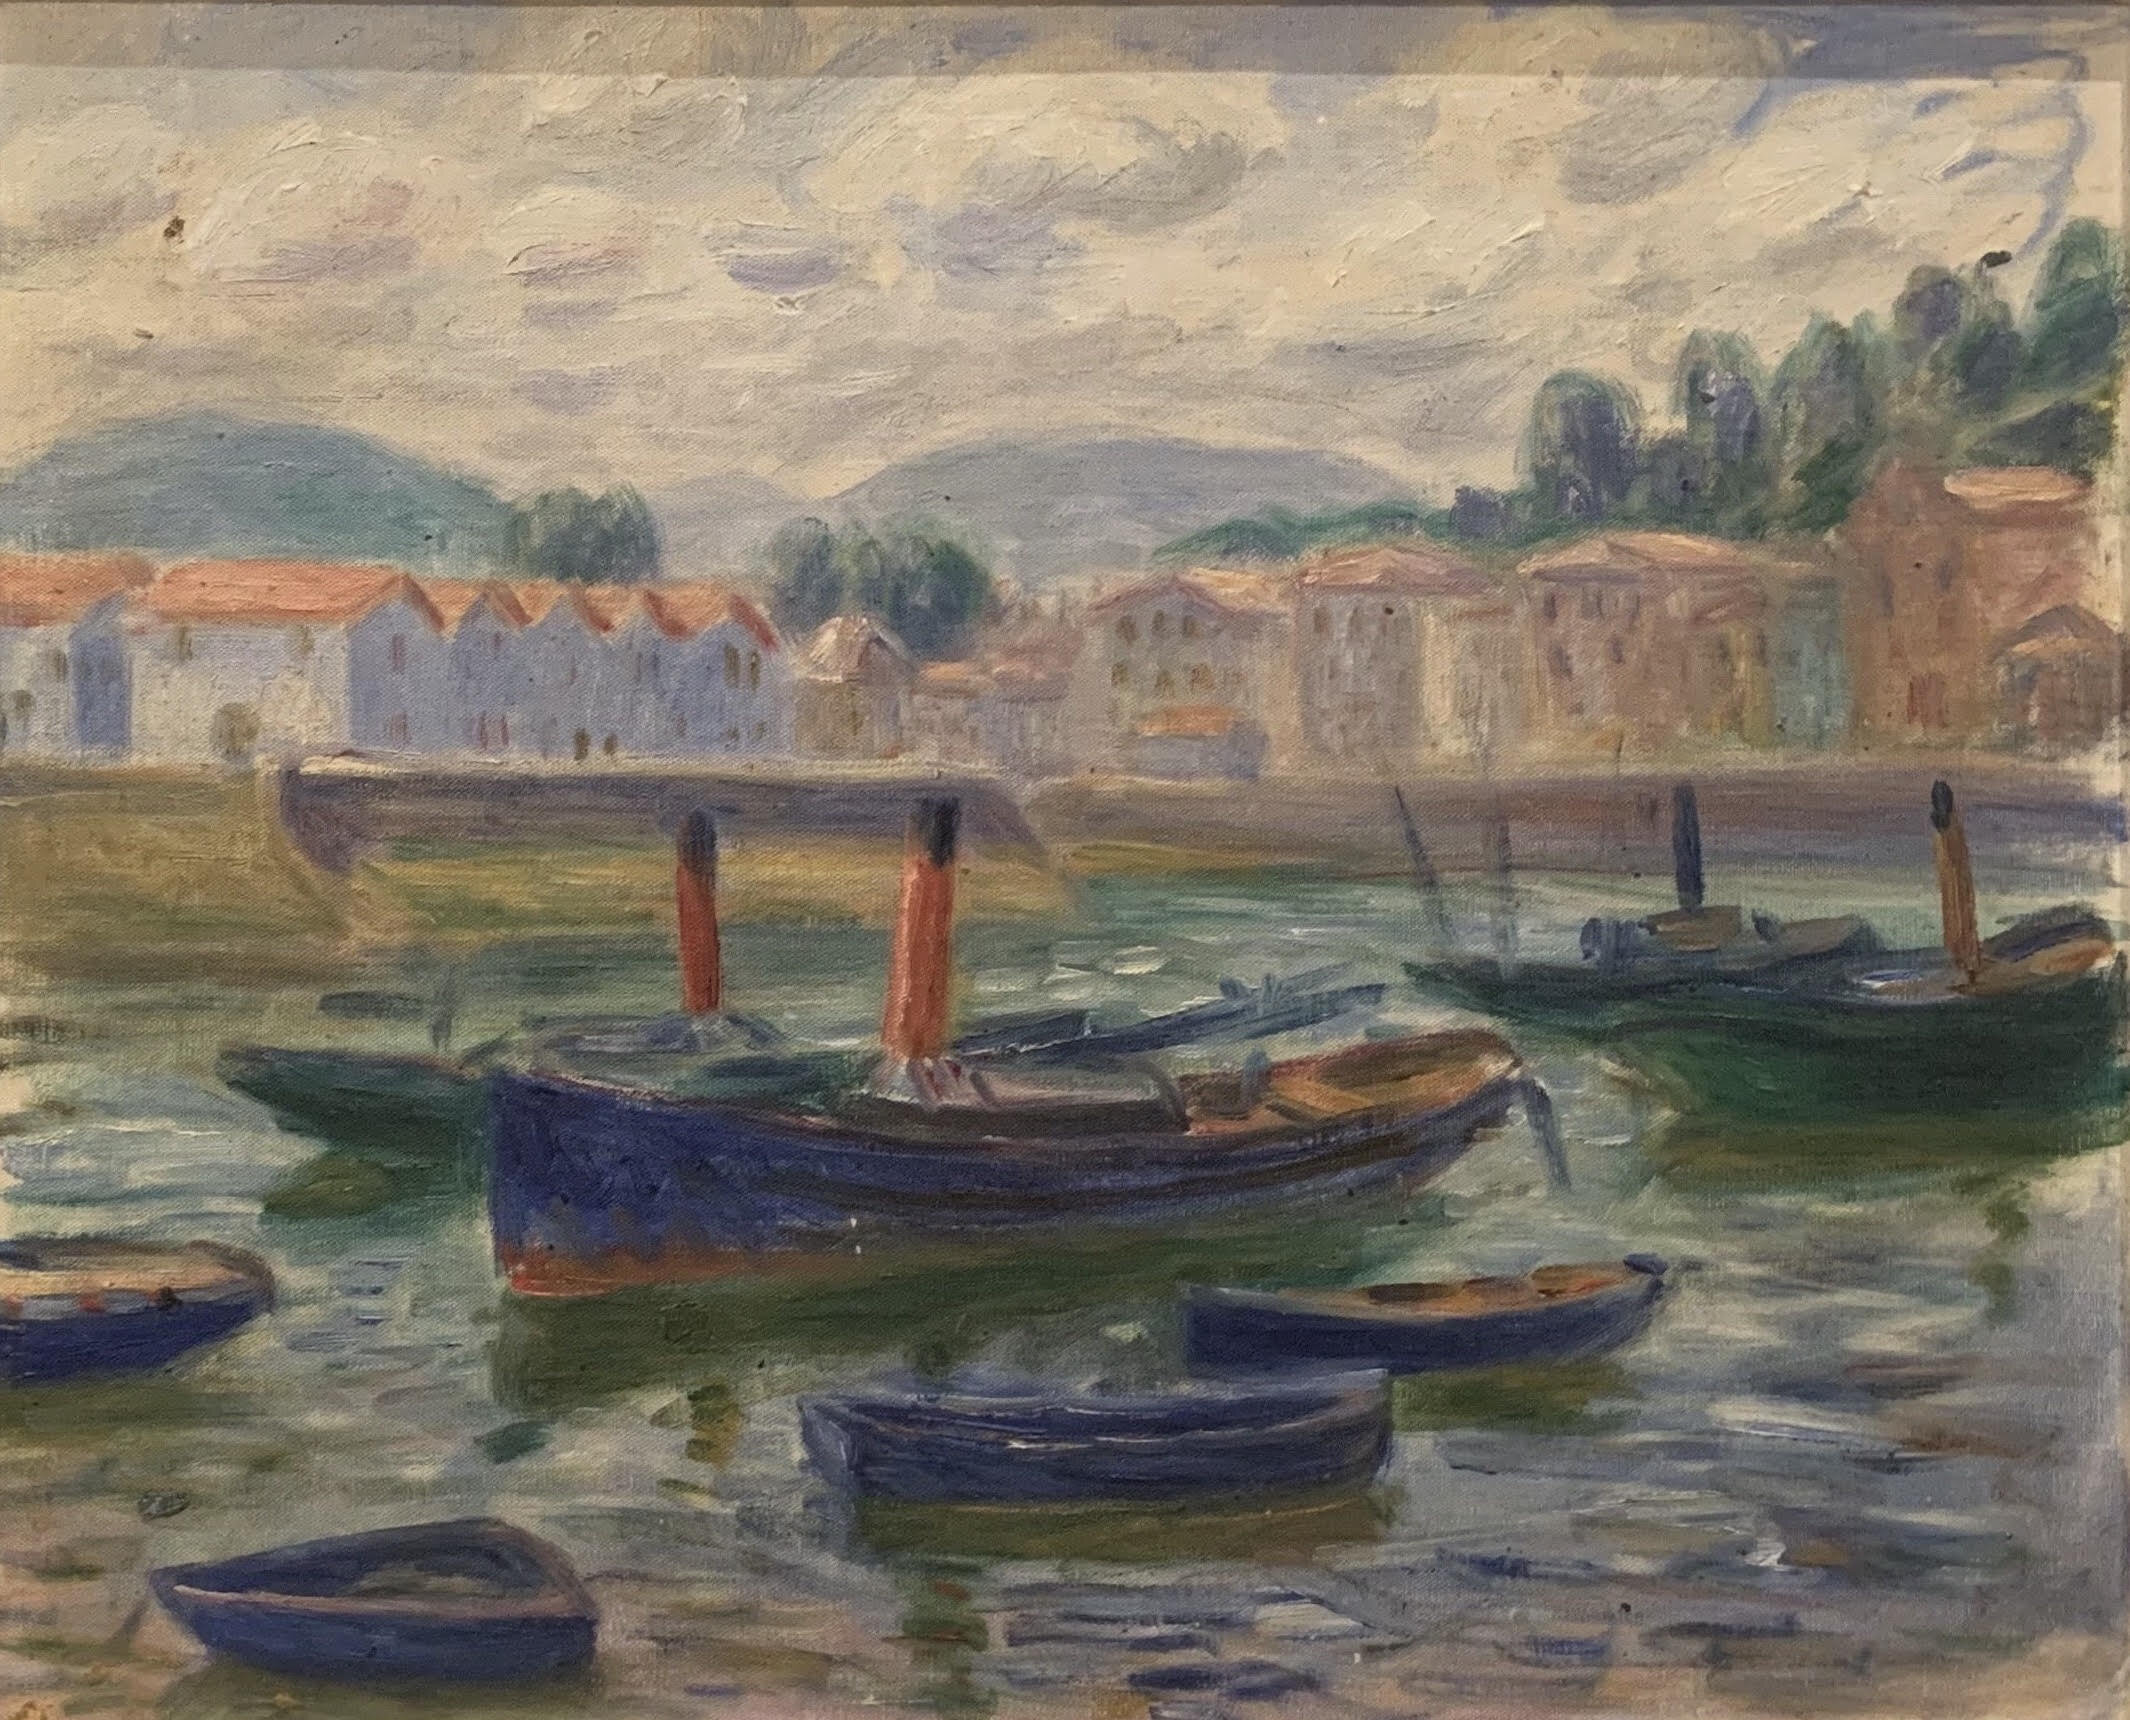 painting of boats on a river with buildings and trees in the background